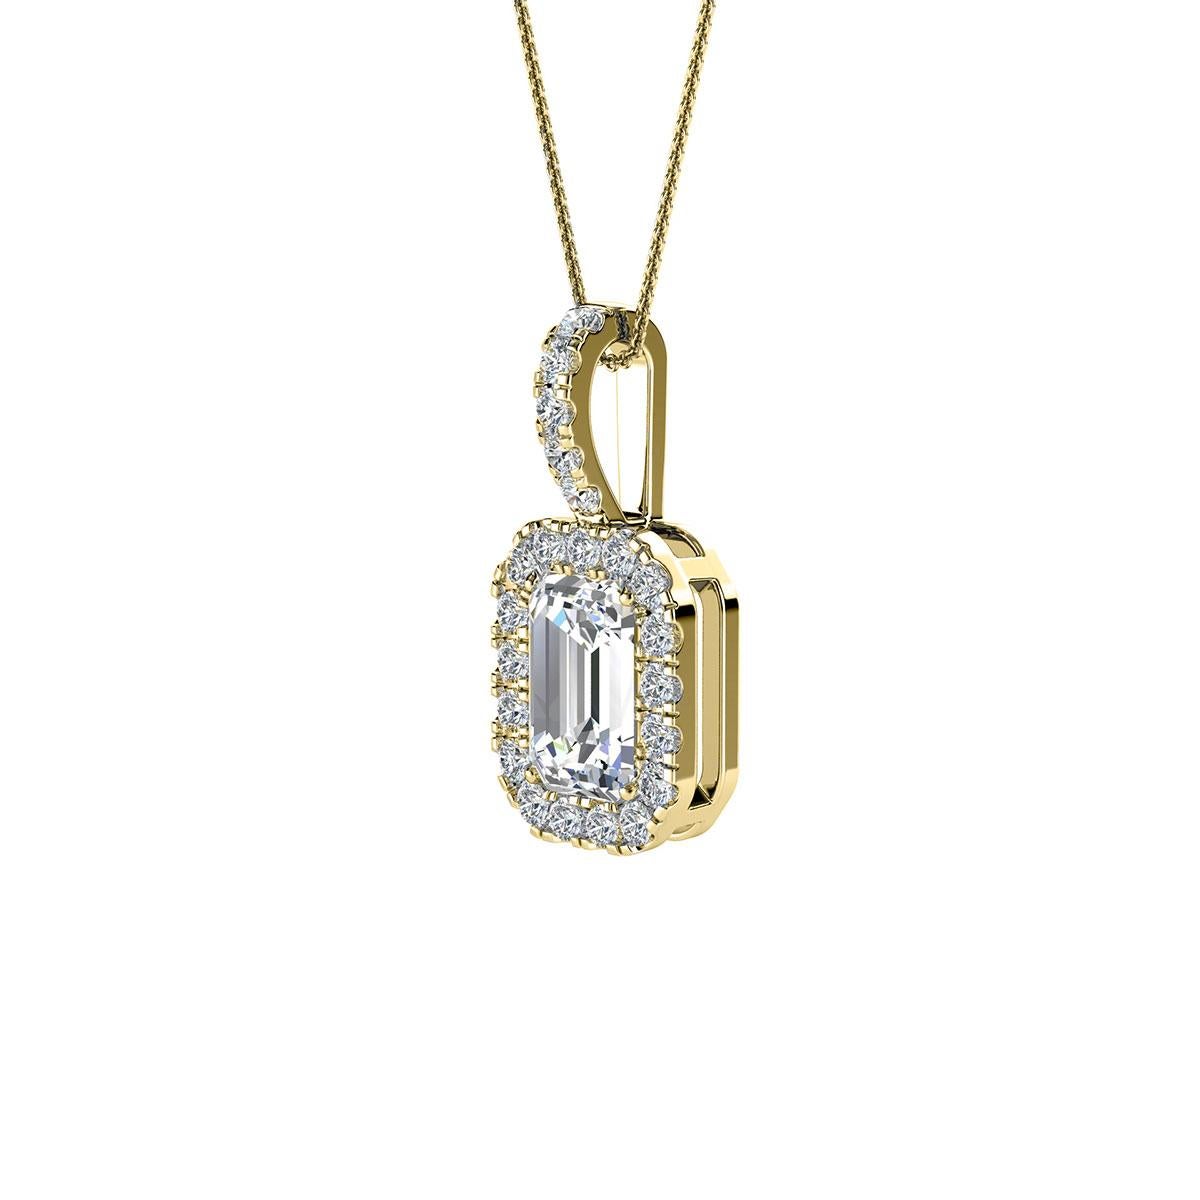 This delicate pendant feature one emerald shaped diamond that is approximately 0.30-carat total weight ( 5mm x 3mm) encircled by a halo of perfectly matched 20 round brilliant diamonds in about 0.20-carat total weight. The pendant is measuring at 14